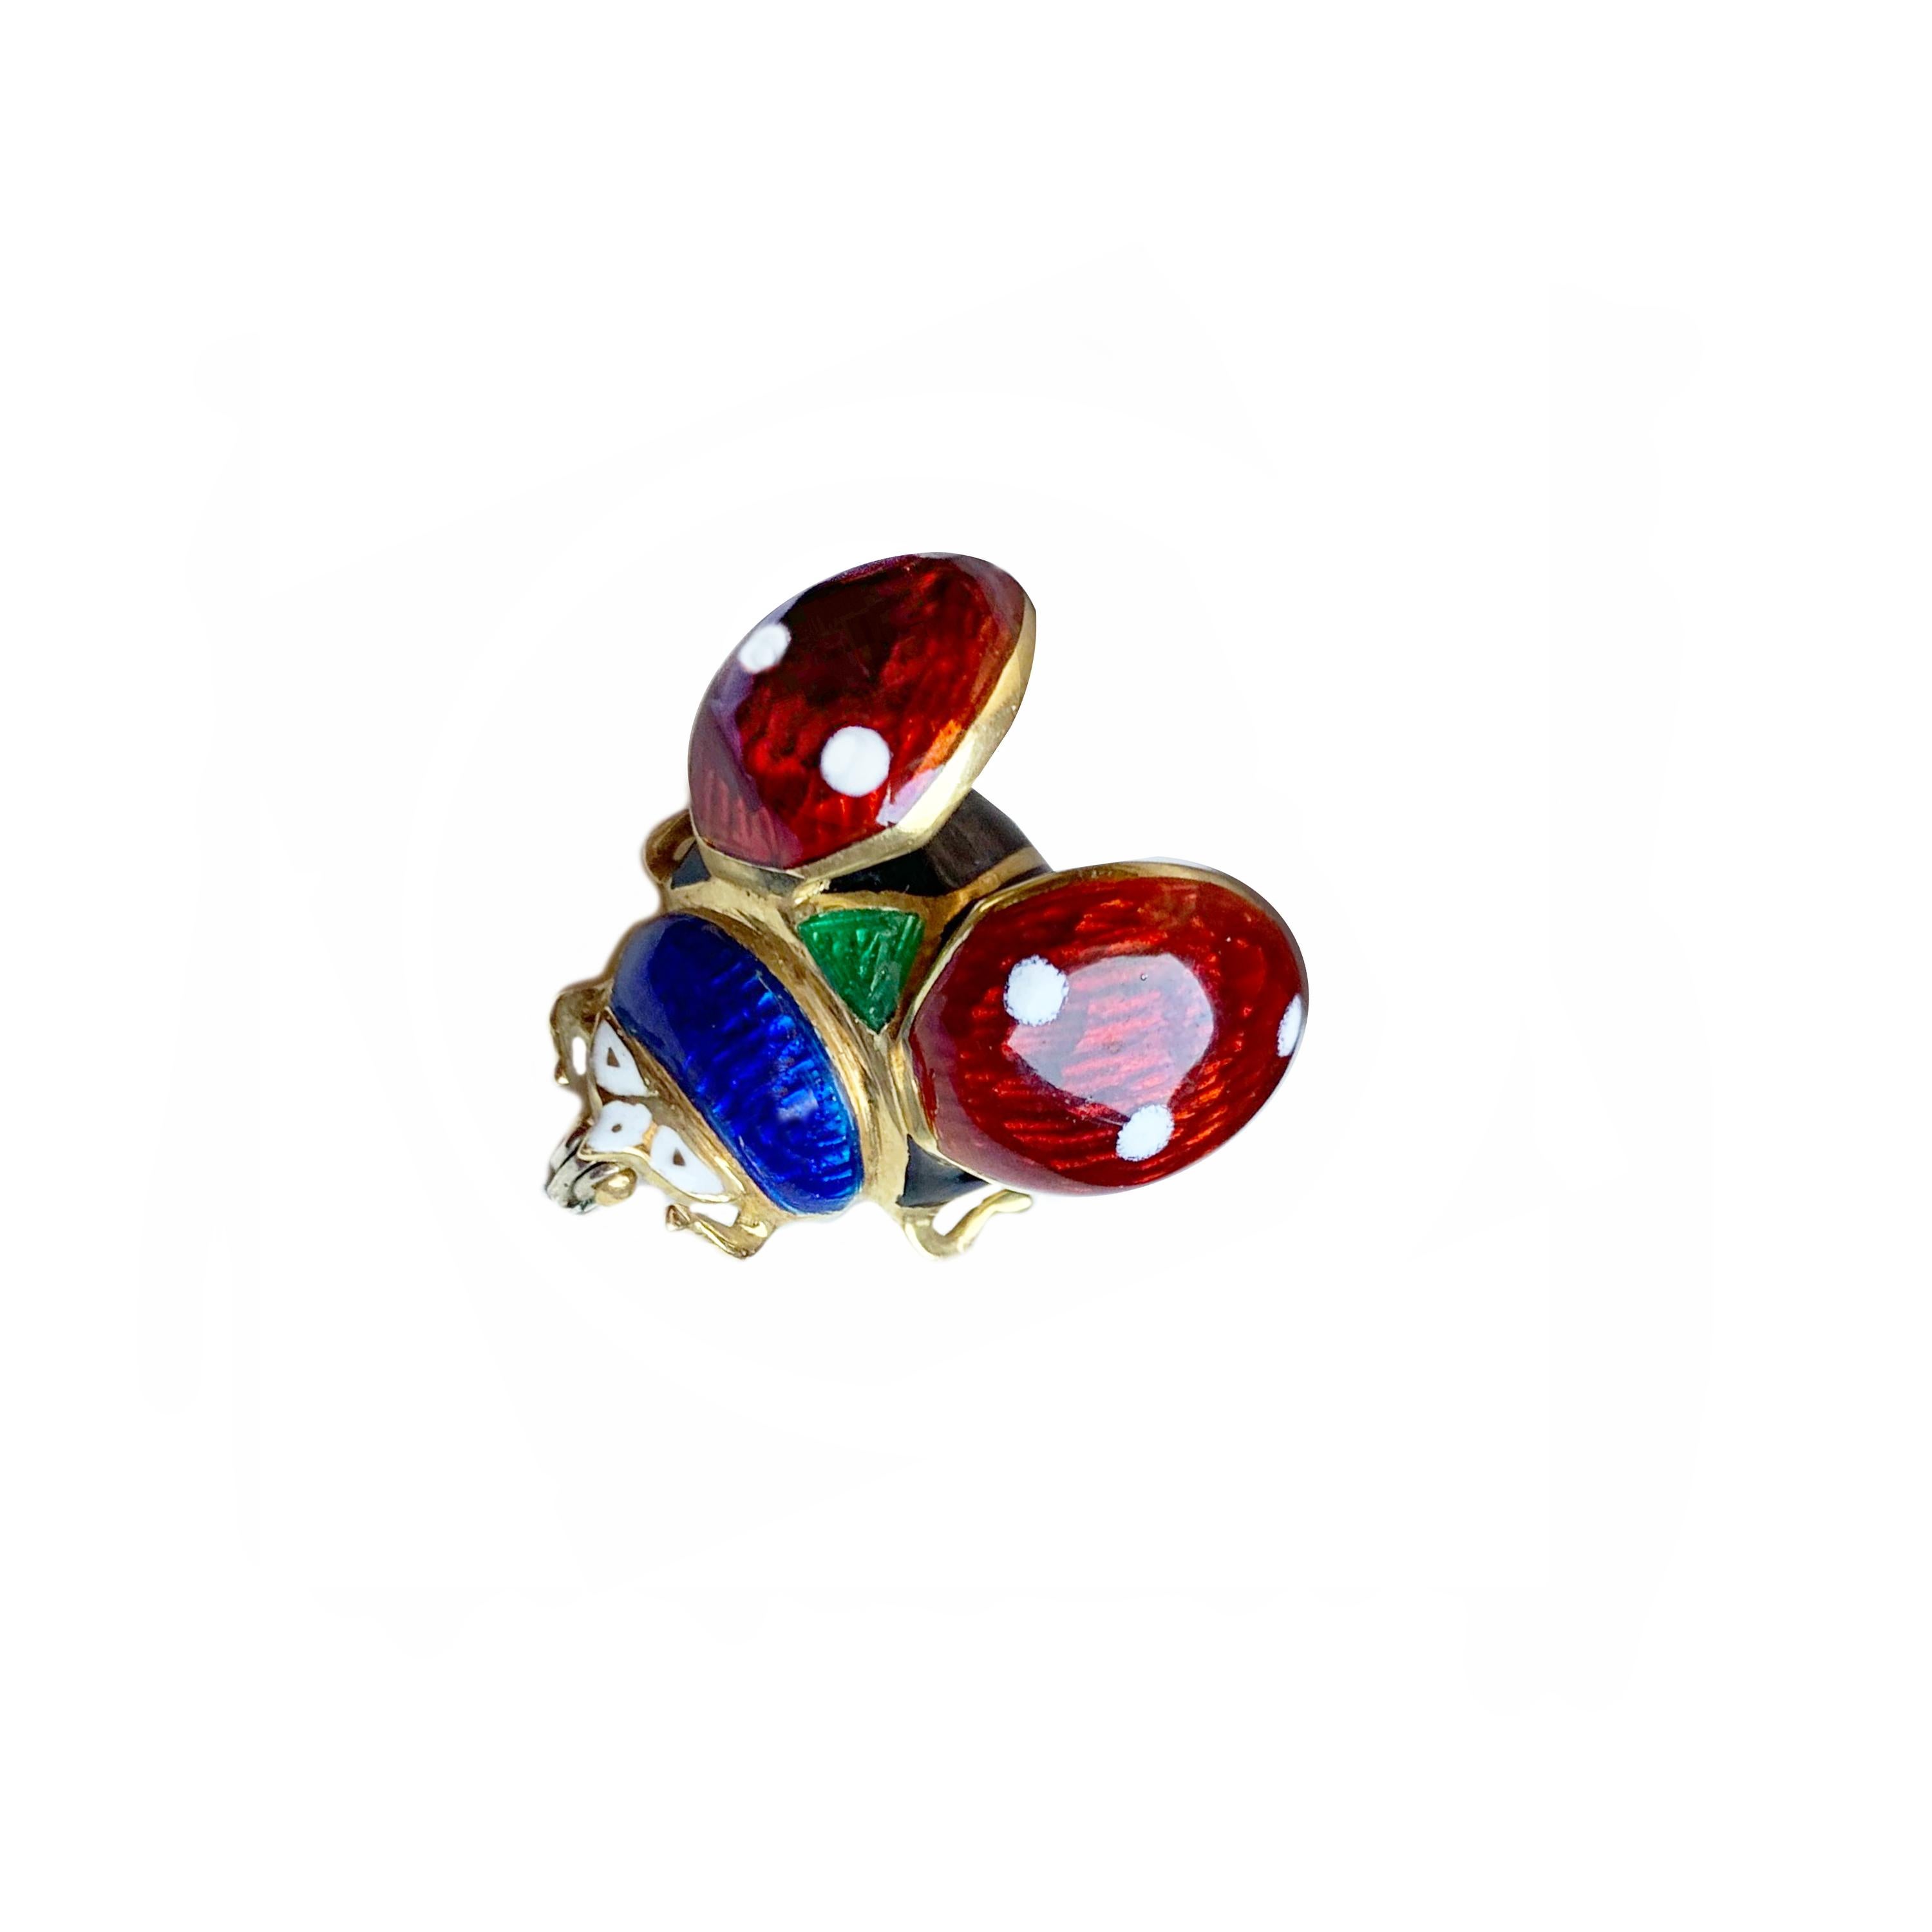 This 18 Kt gold and enamel brooch depicting a ladybug with open wings was handcrafted by a talented Italian goldsmith.
Symbol of good luck, the ladybug is said to give blessings to those she encounters. Master in the art of metamorphosis, she